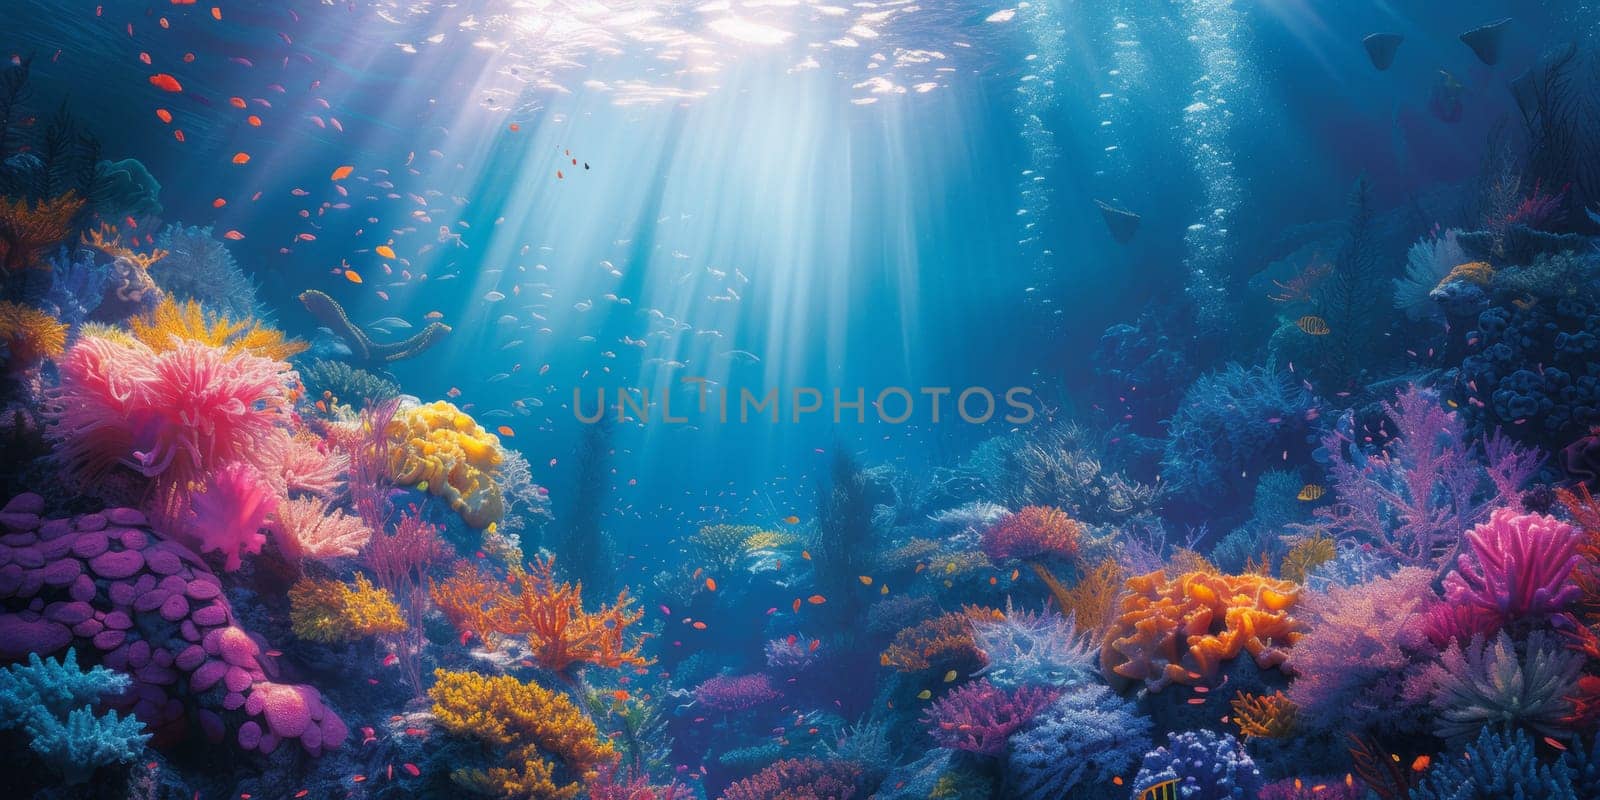 A colorful underwater scene with sunlight shining through the water, AI by starush